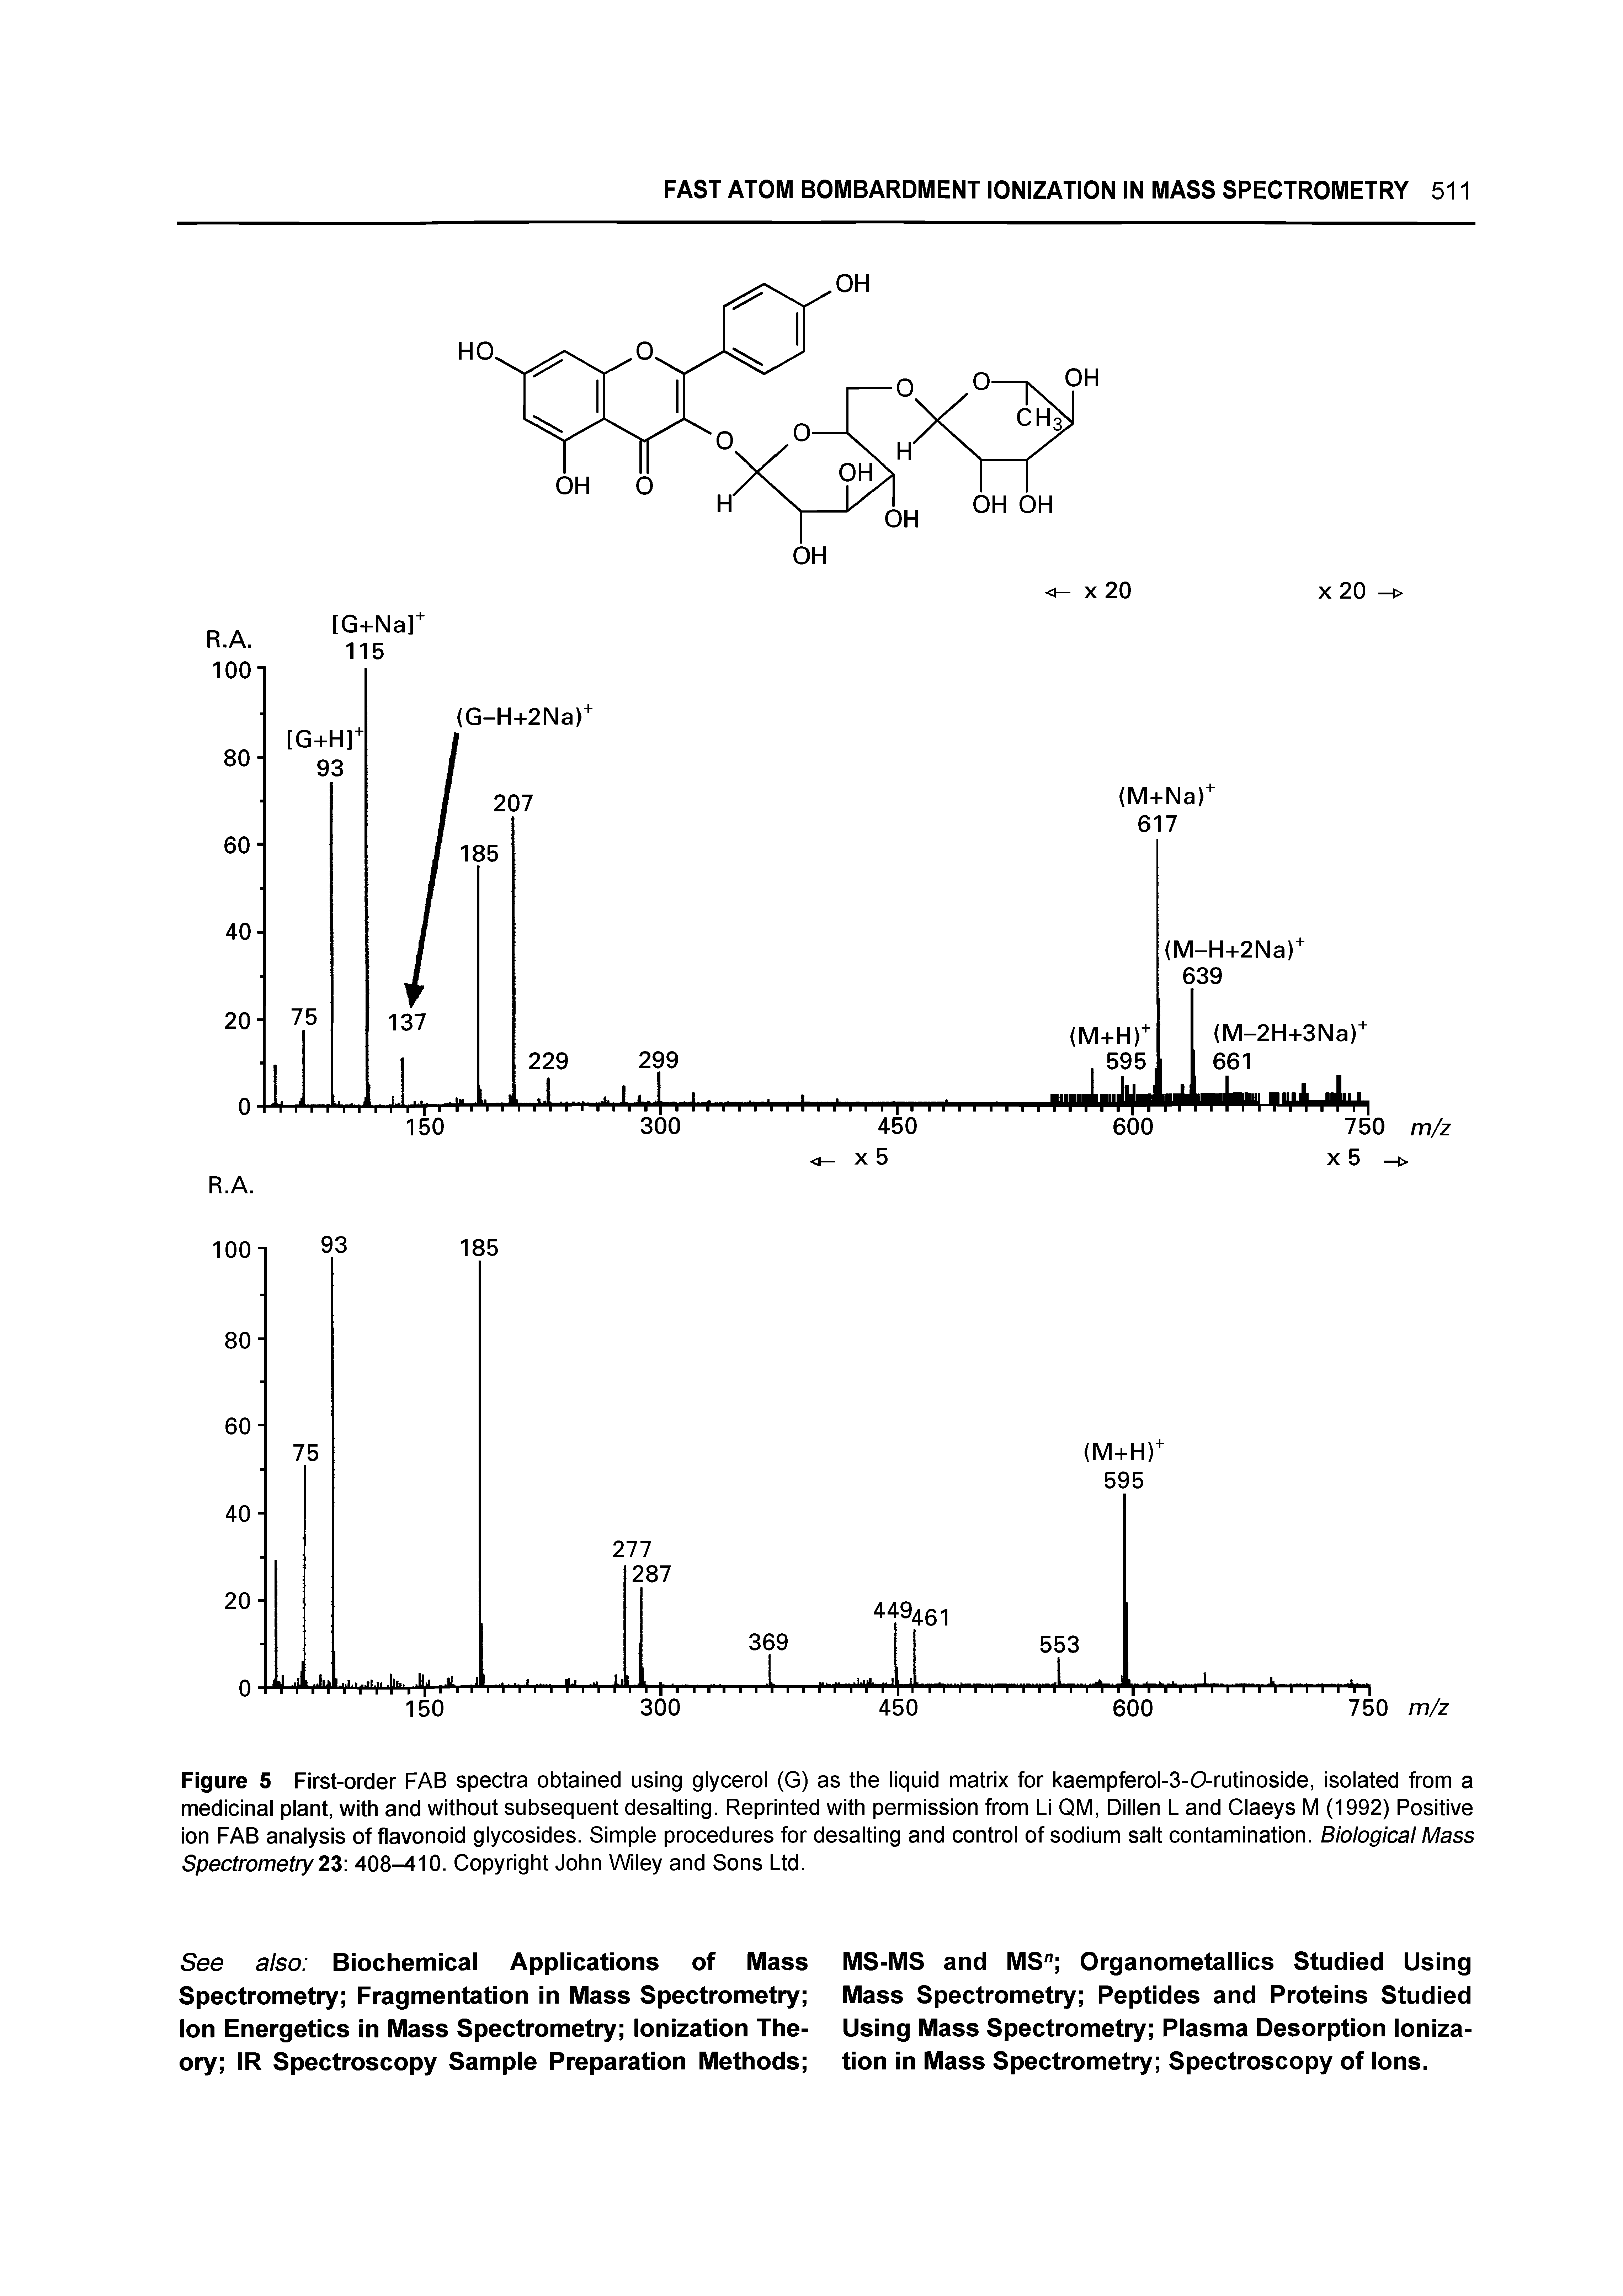 Figure 5 First-order FAB spectra obtained using glycerol (G) as the liquid matrix for kaempferol-3-O-rutinoside, isolated from a medicinal plant, with and without subsequent desalting. Reprinted with permission from Li QM, Dillen L and Claeys M (1992) Positive ion FAB analysis of flavonoid glycosides. Simple procedures for desalting and control of sodium salt contamination. Biological Mass Spectrometry 2Z 408-410. Copyright John Wiley and Sons Ltd.